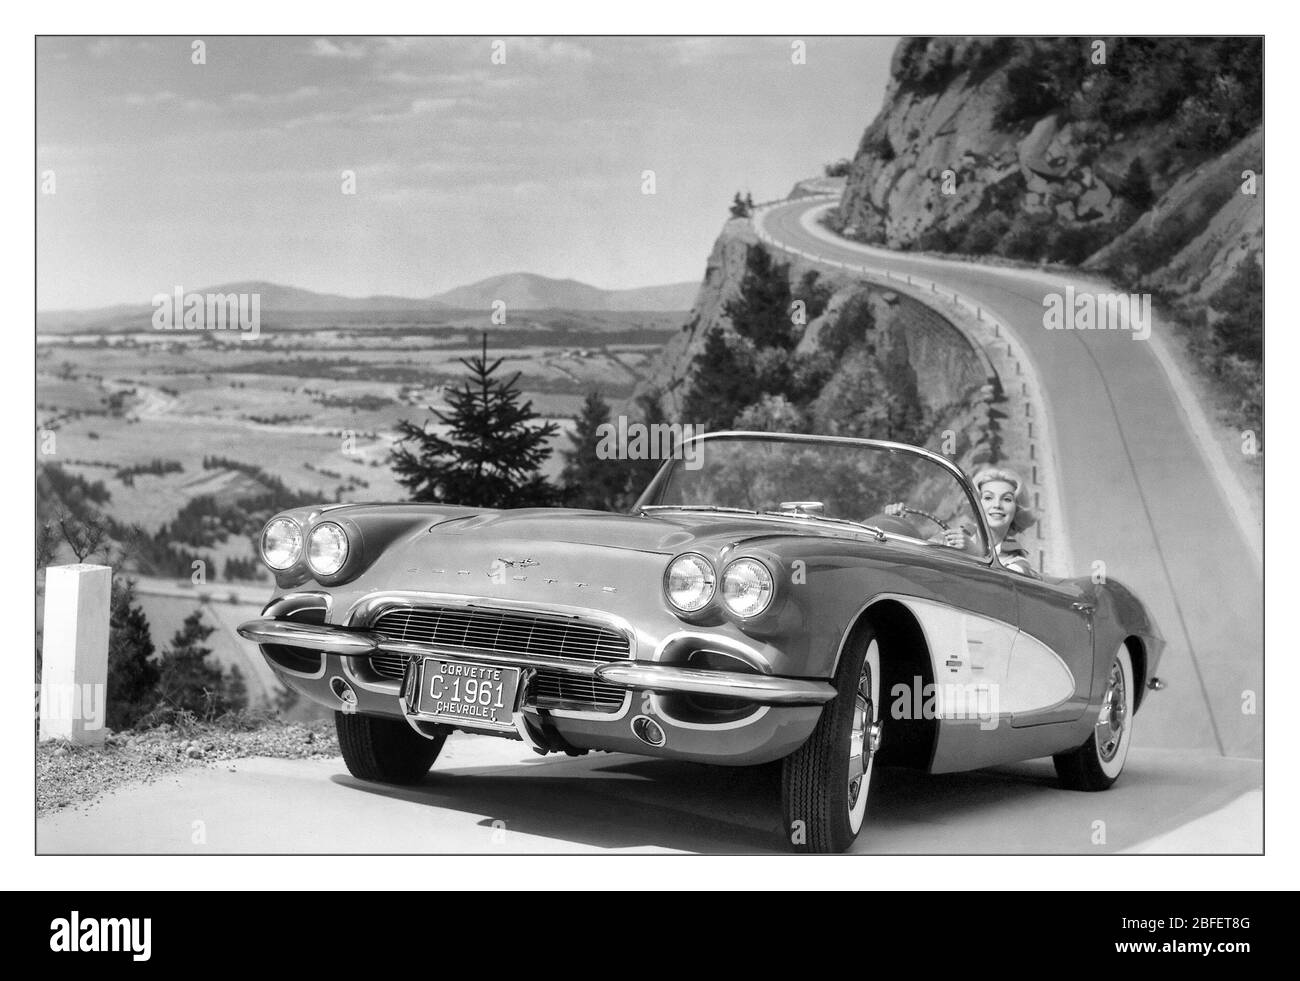 Chevrolet Corvette 1961 open top 2 seater sports car motorcar product image photograph with model in outdoor winding mountainous road lifestyle situation Stock Photo